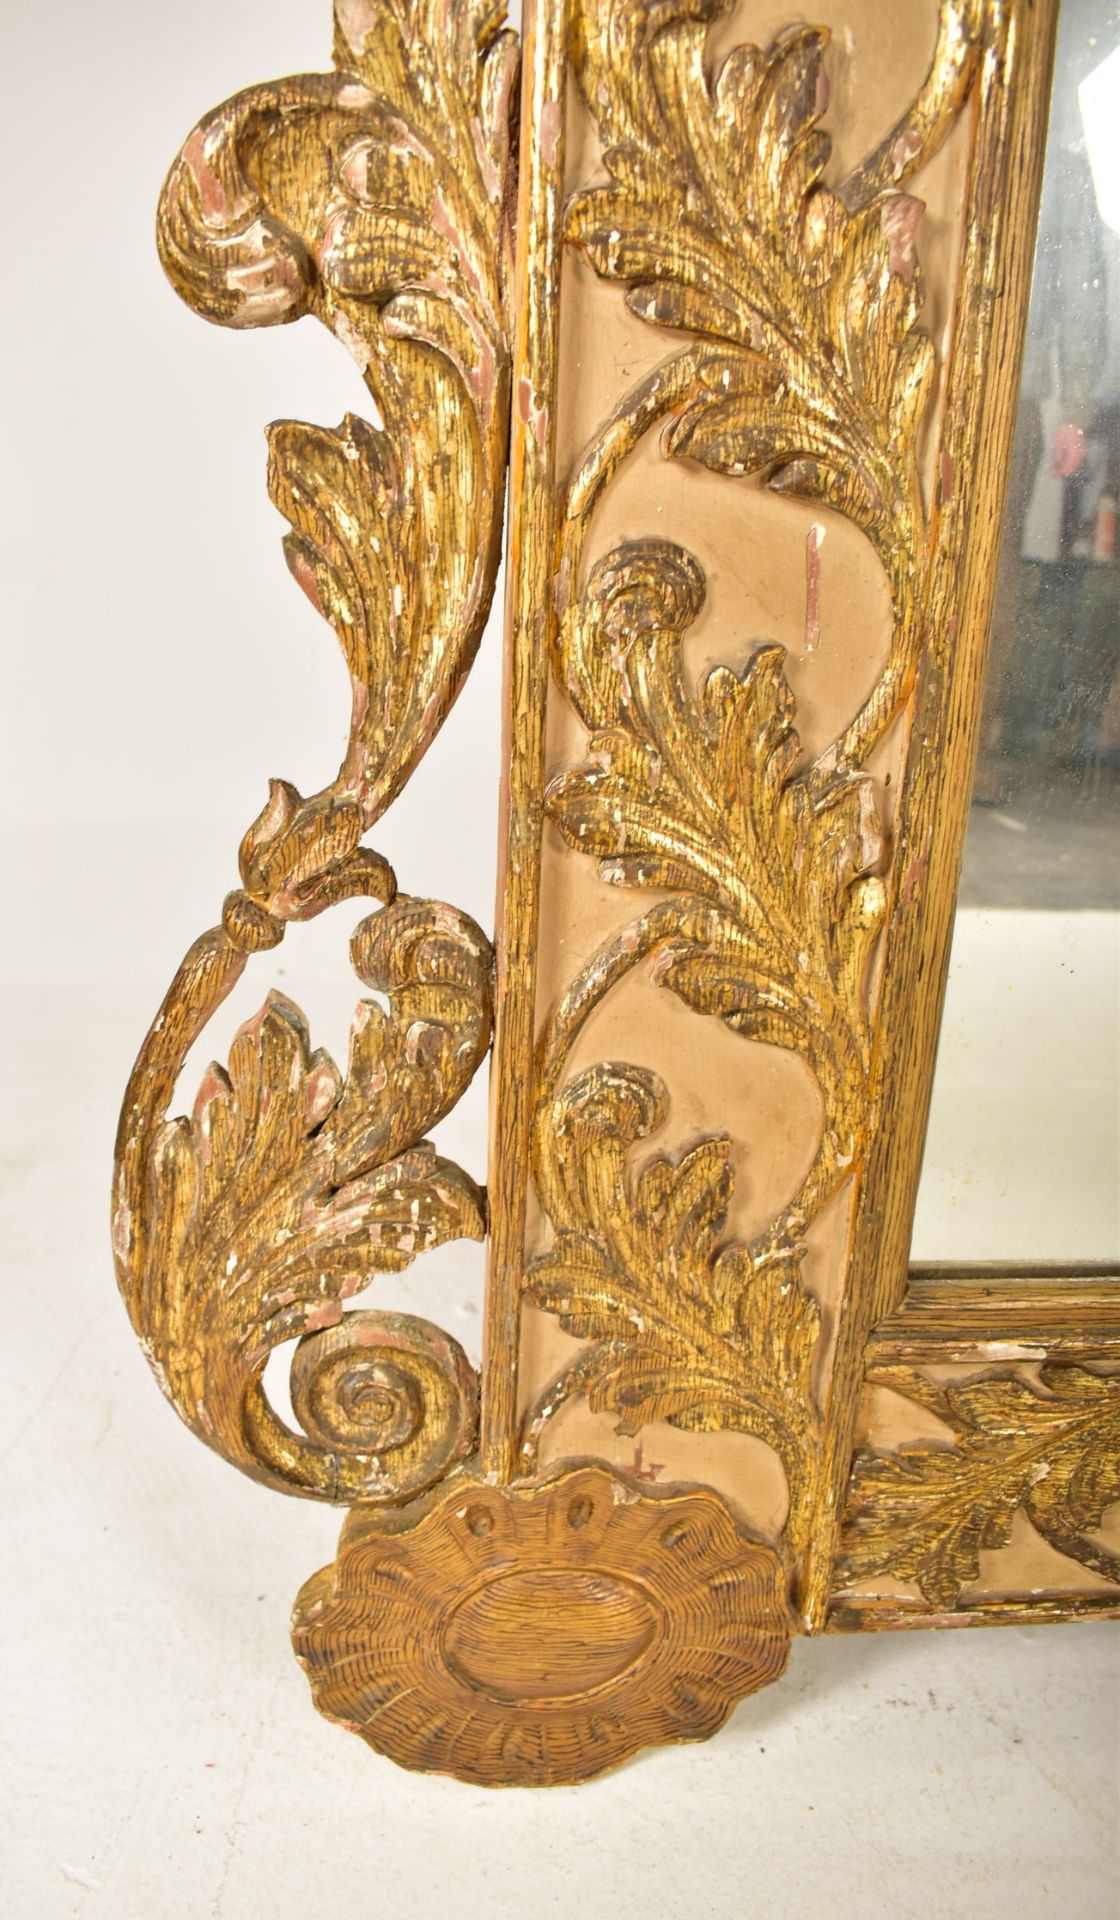 19TH CENTURY CONTINENTAL ROCOCO STYLE GILT WOOD MIRROR - Image 3 of 7